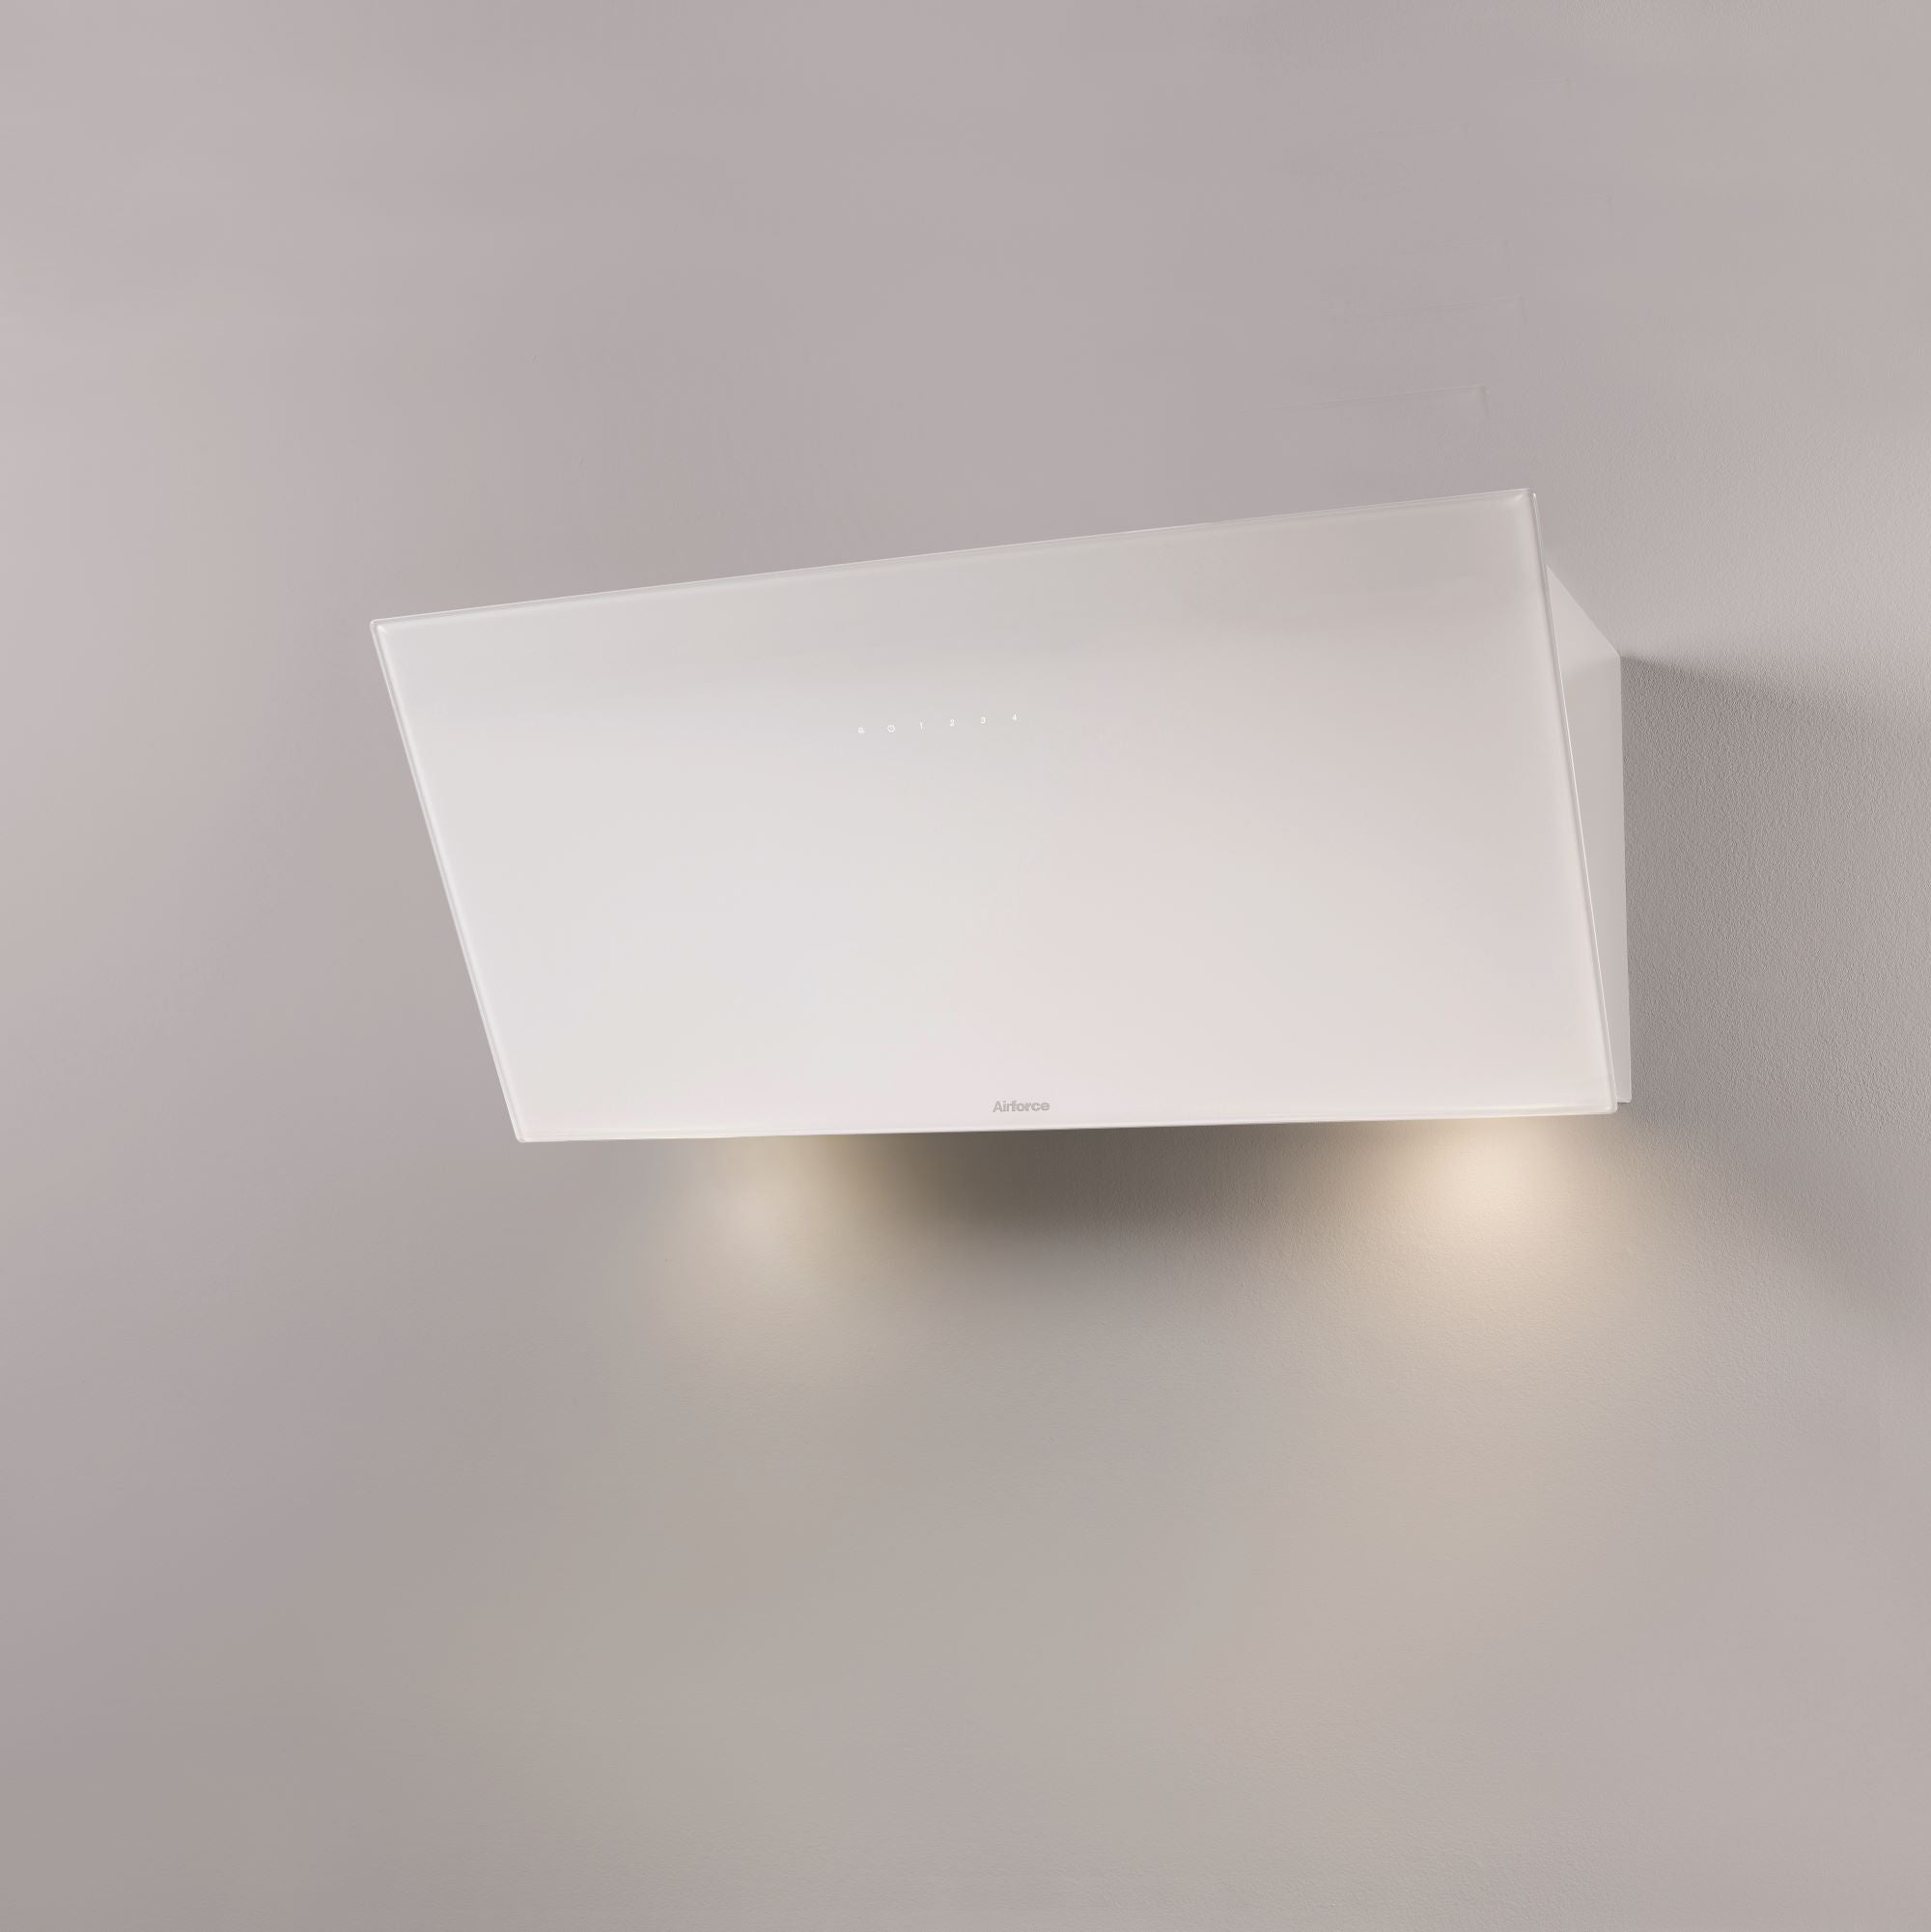 Airforce V1 90cm Angled Wall Mounted Touch Control Cooker Hood with Integra Built In-White Glass Finish